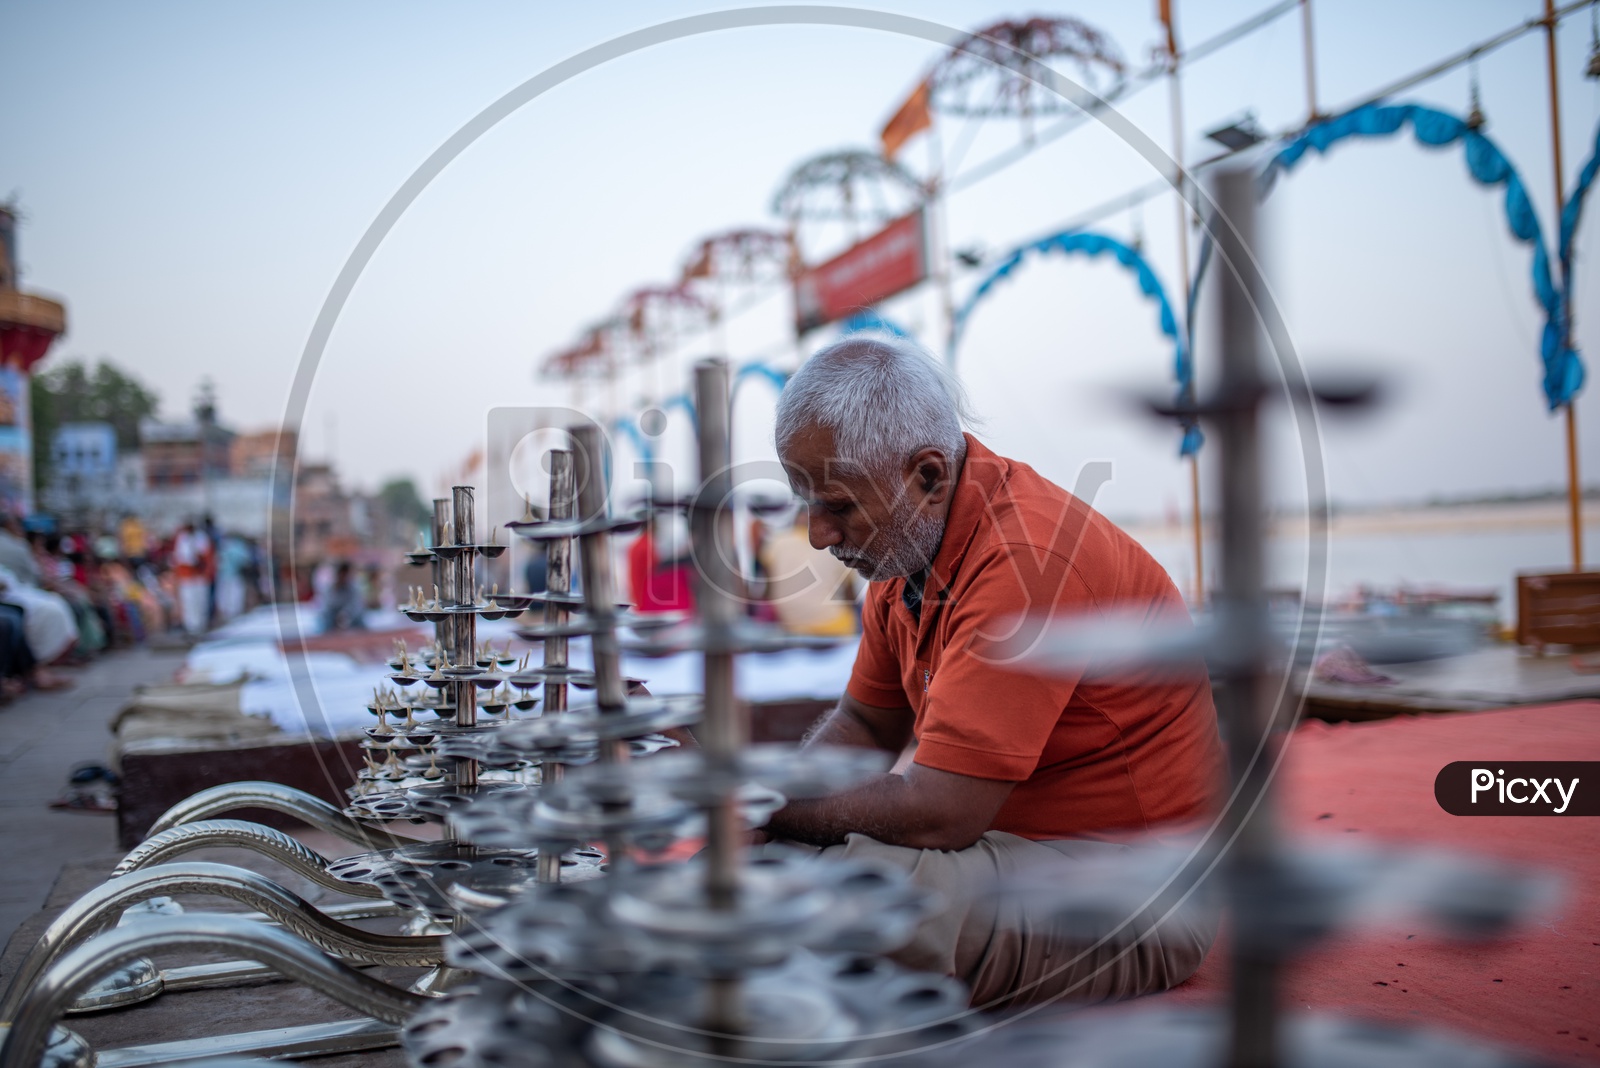 A Man Preparing  Ganga Aarti  With Edible Oil and Cotton Buds  at The Ghats Of  Varanasi